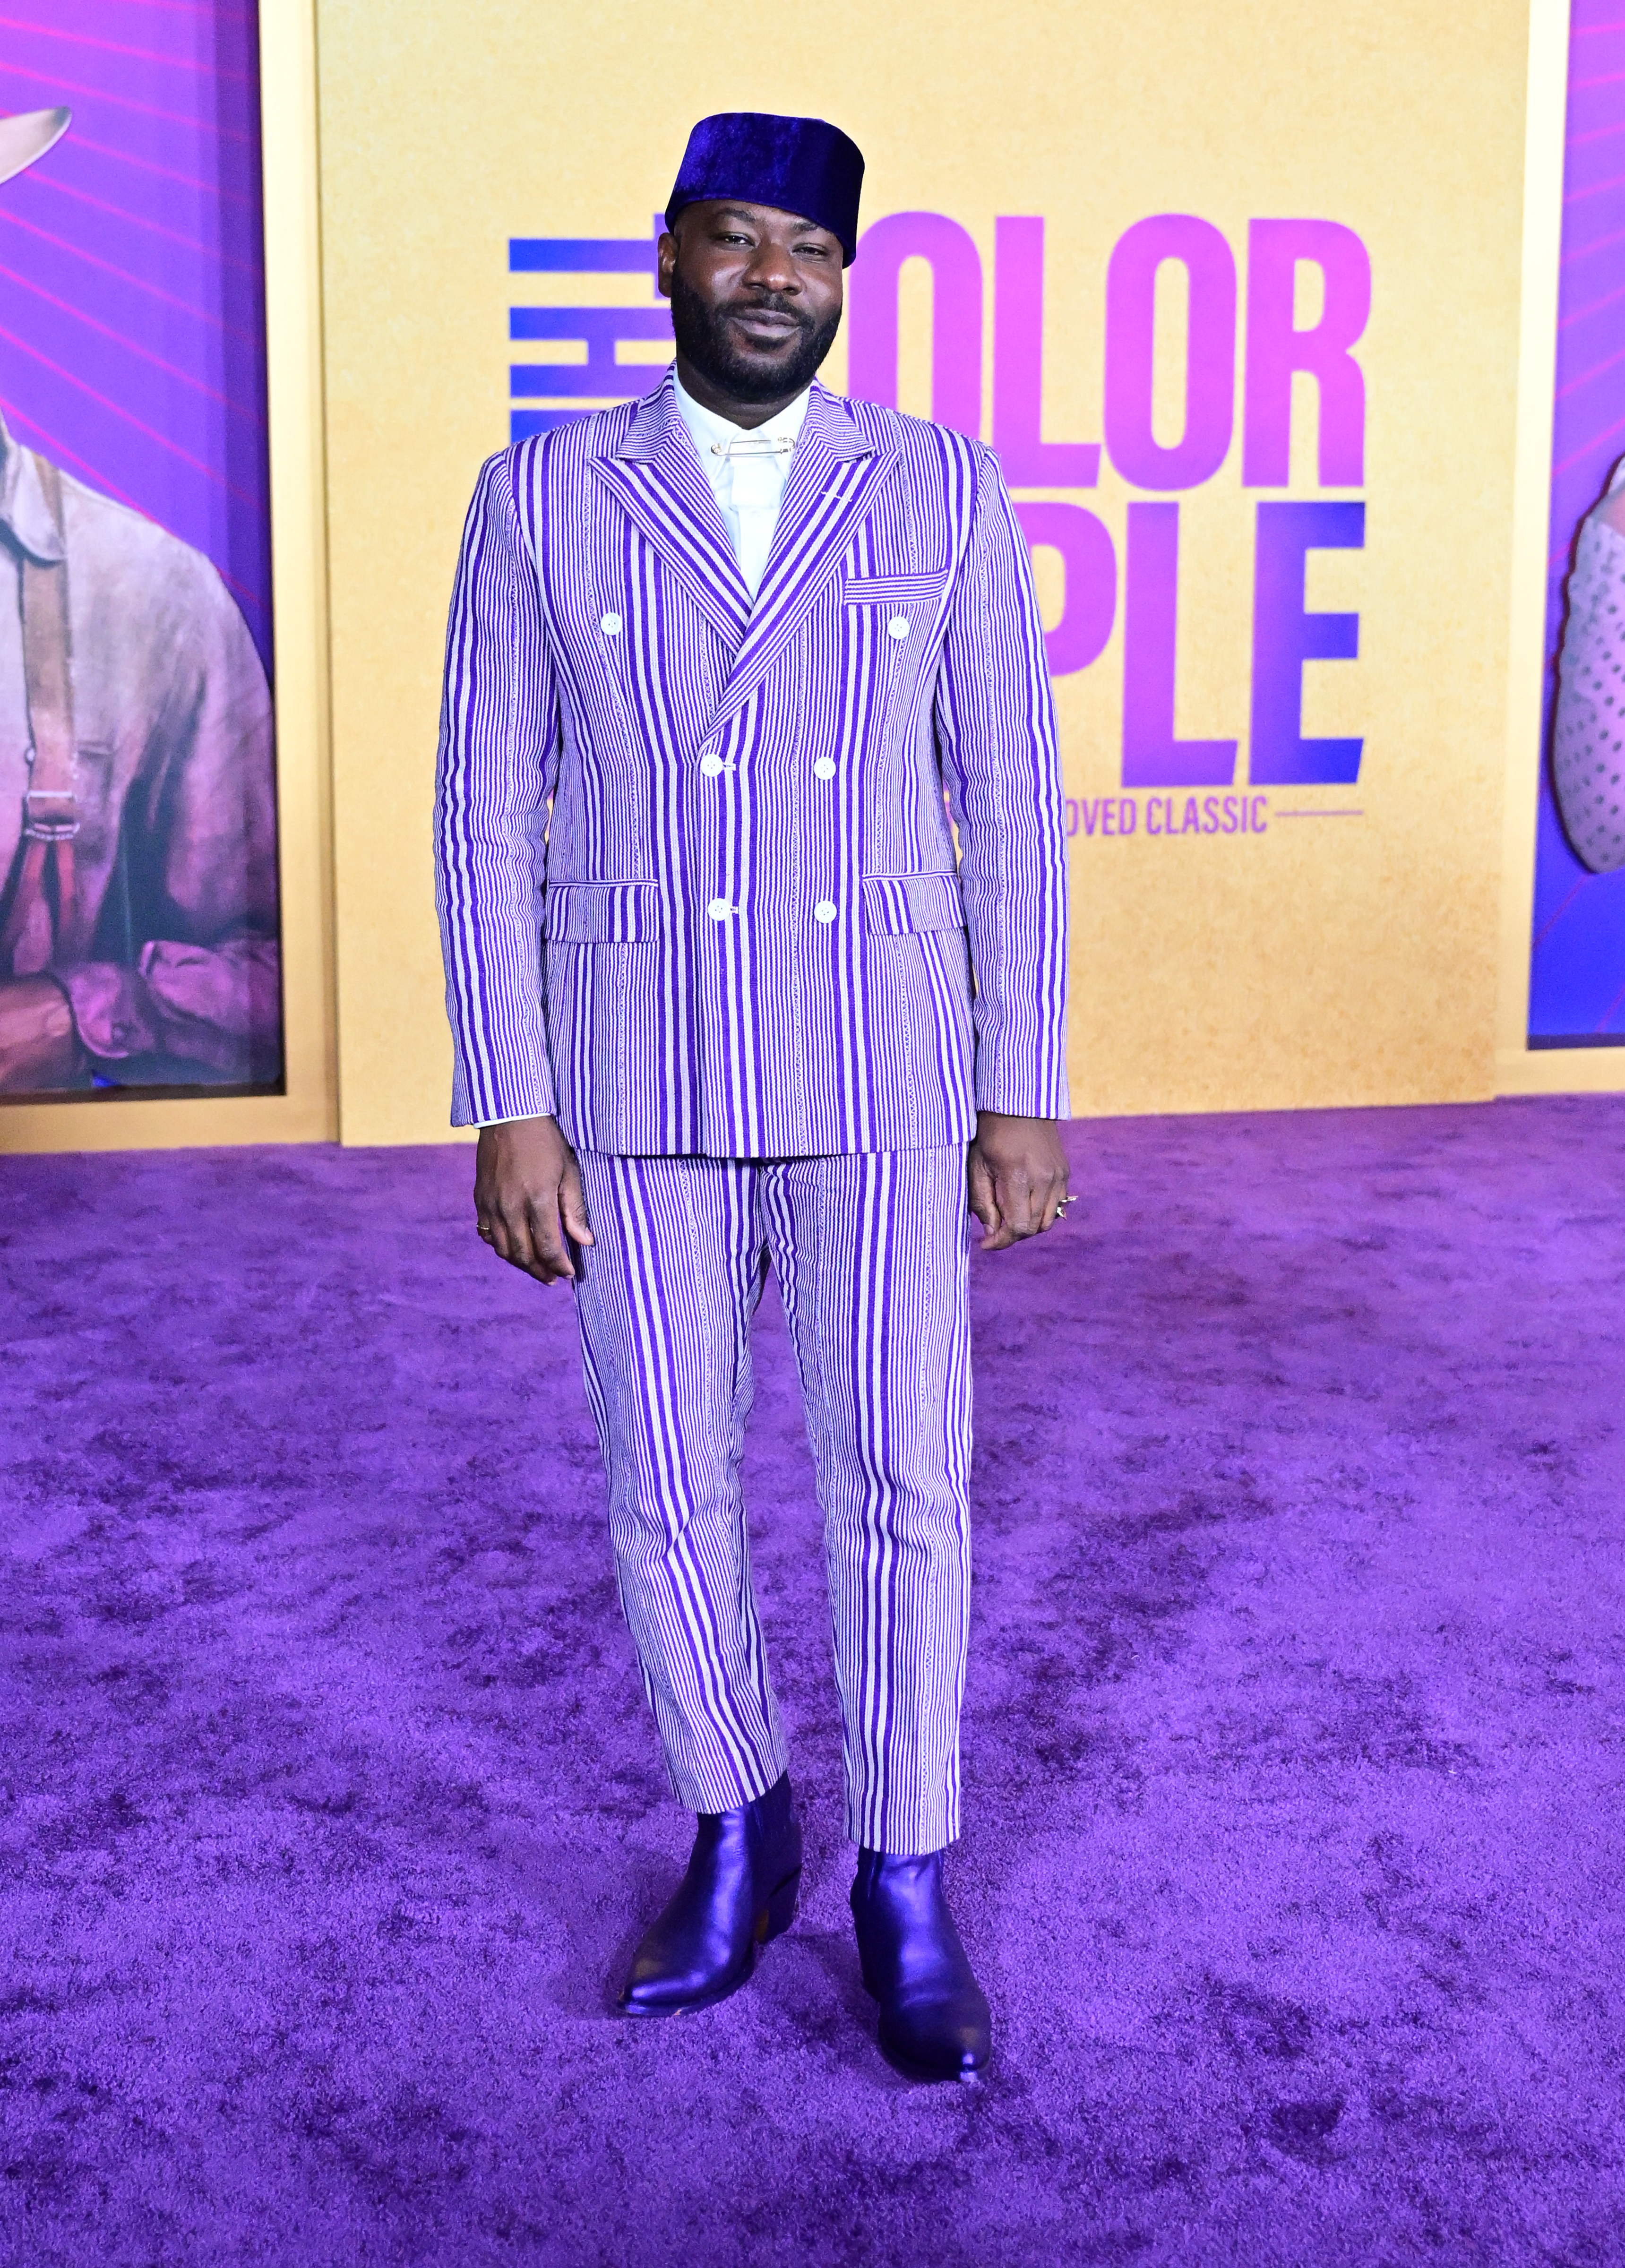 Blitz in a purple and white striped suit and purplish blue kufi hat